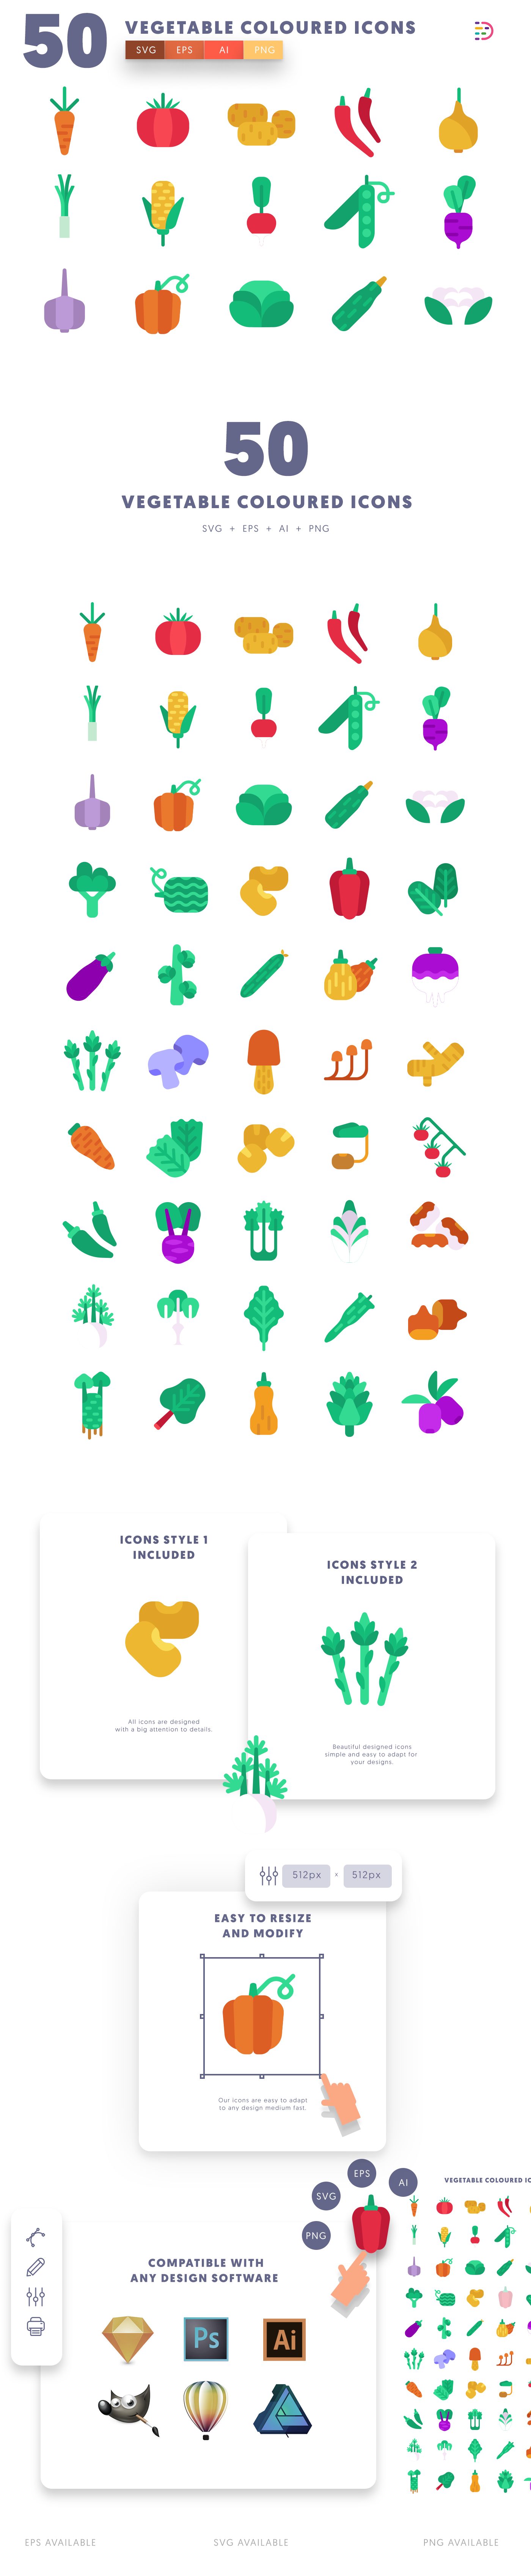 Vegetable Coloured icons info graphic